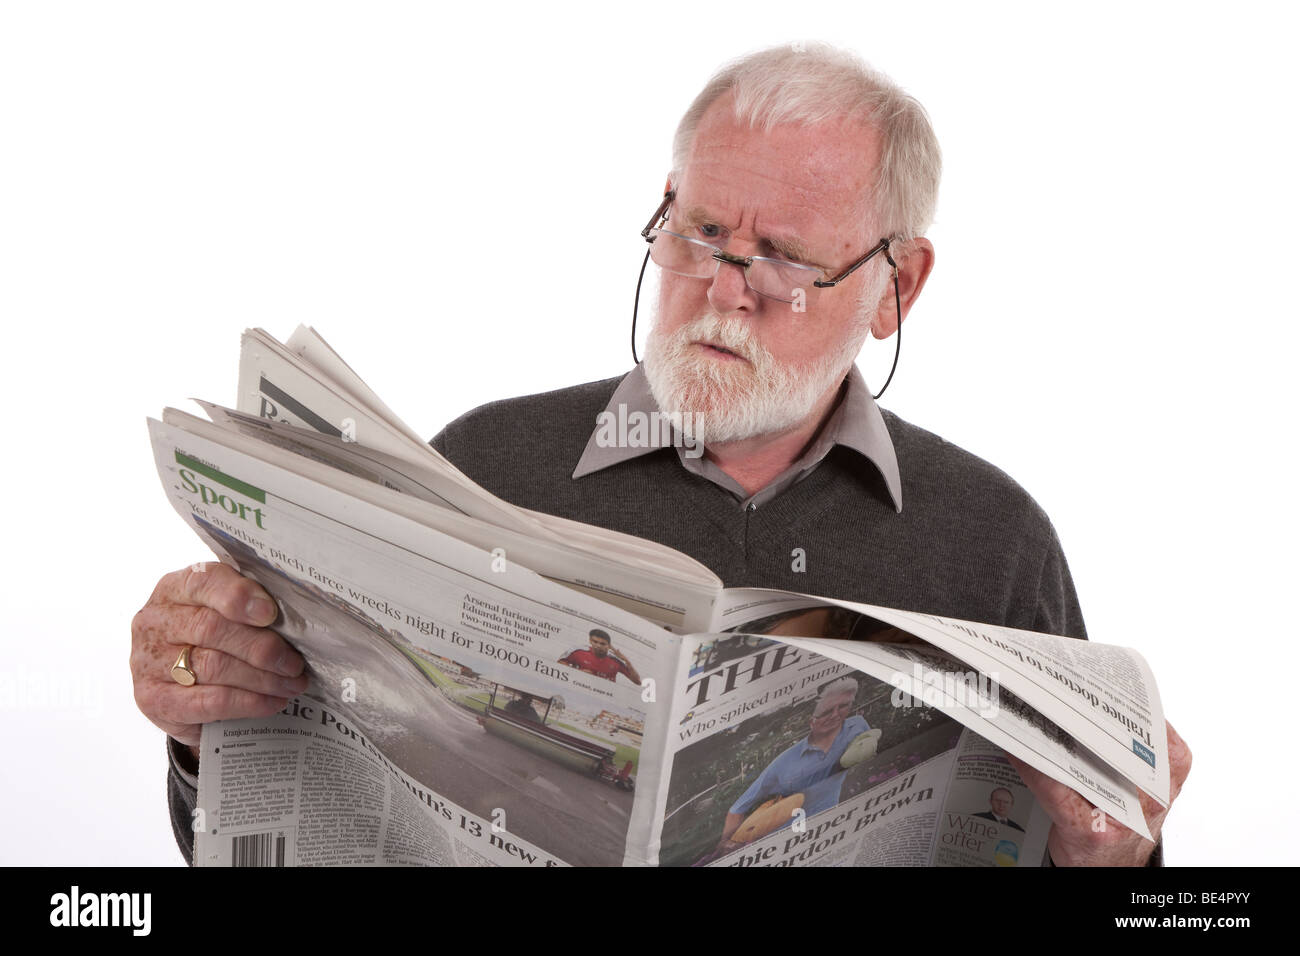 Older man reading newspaper with angry expression. Stock Photo